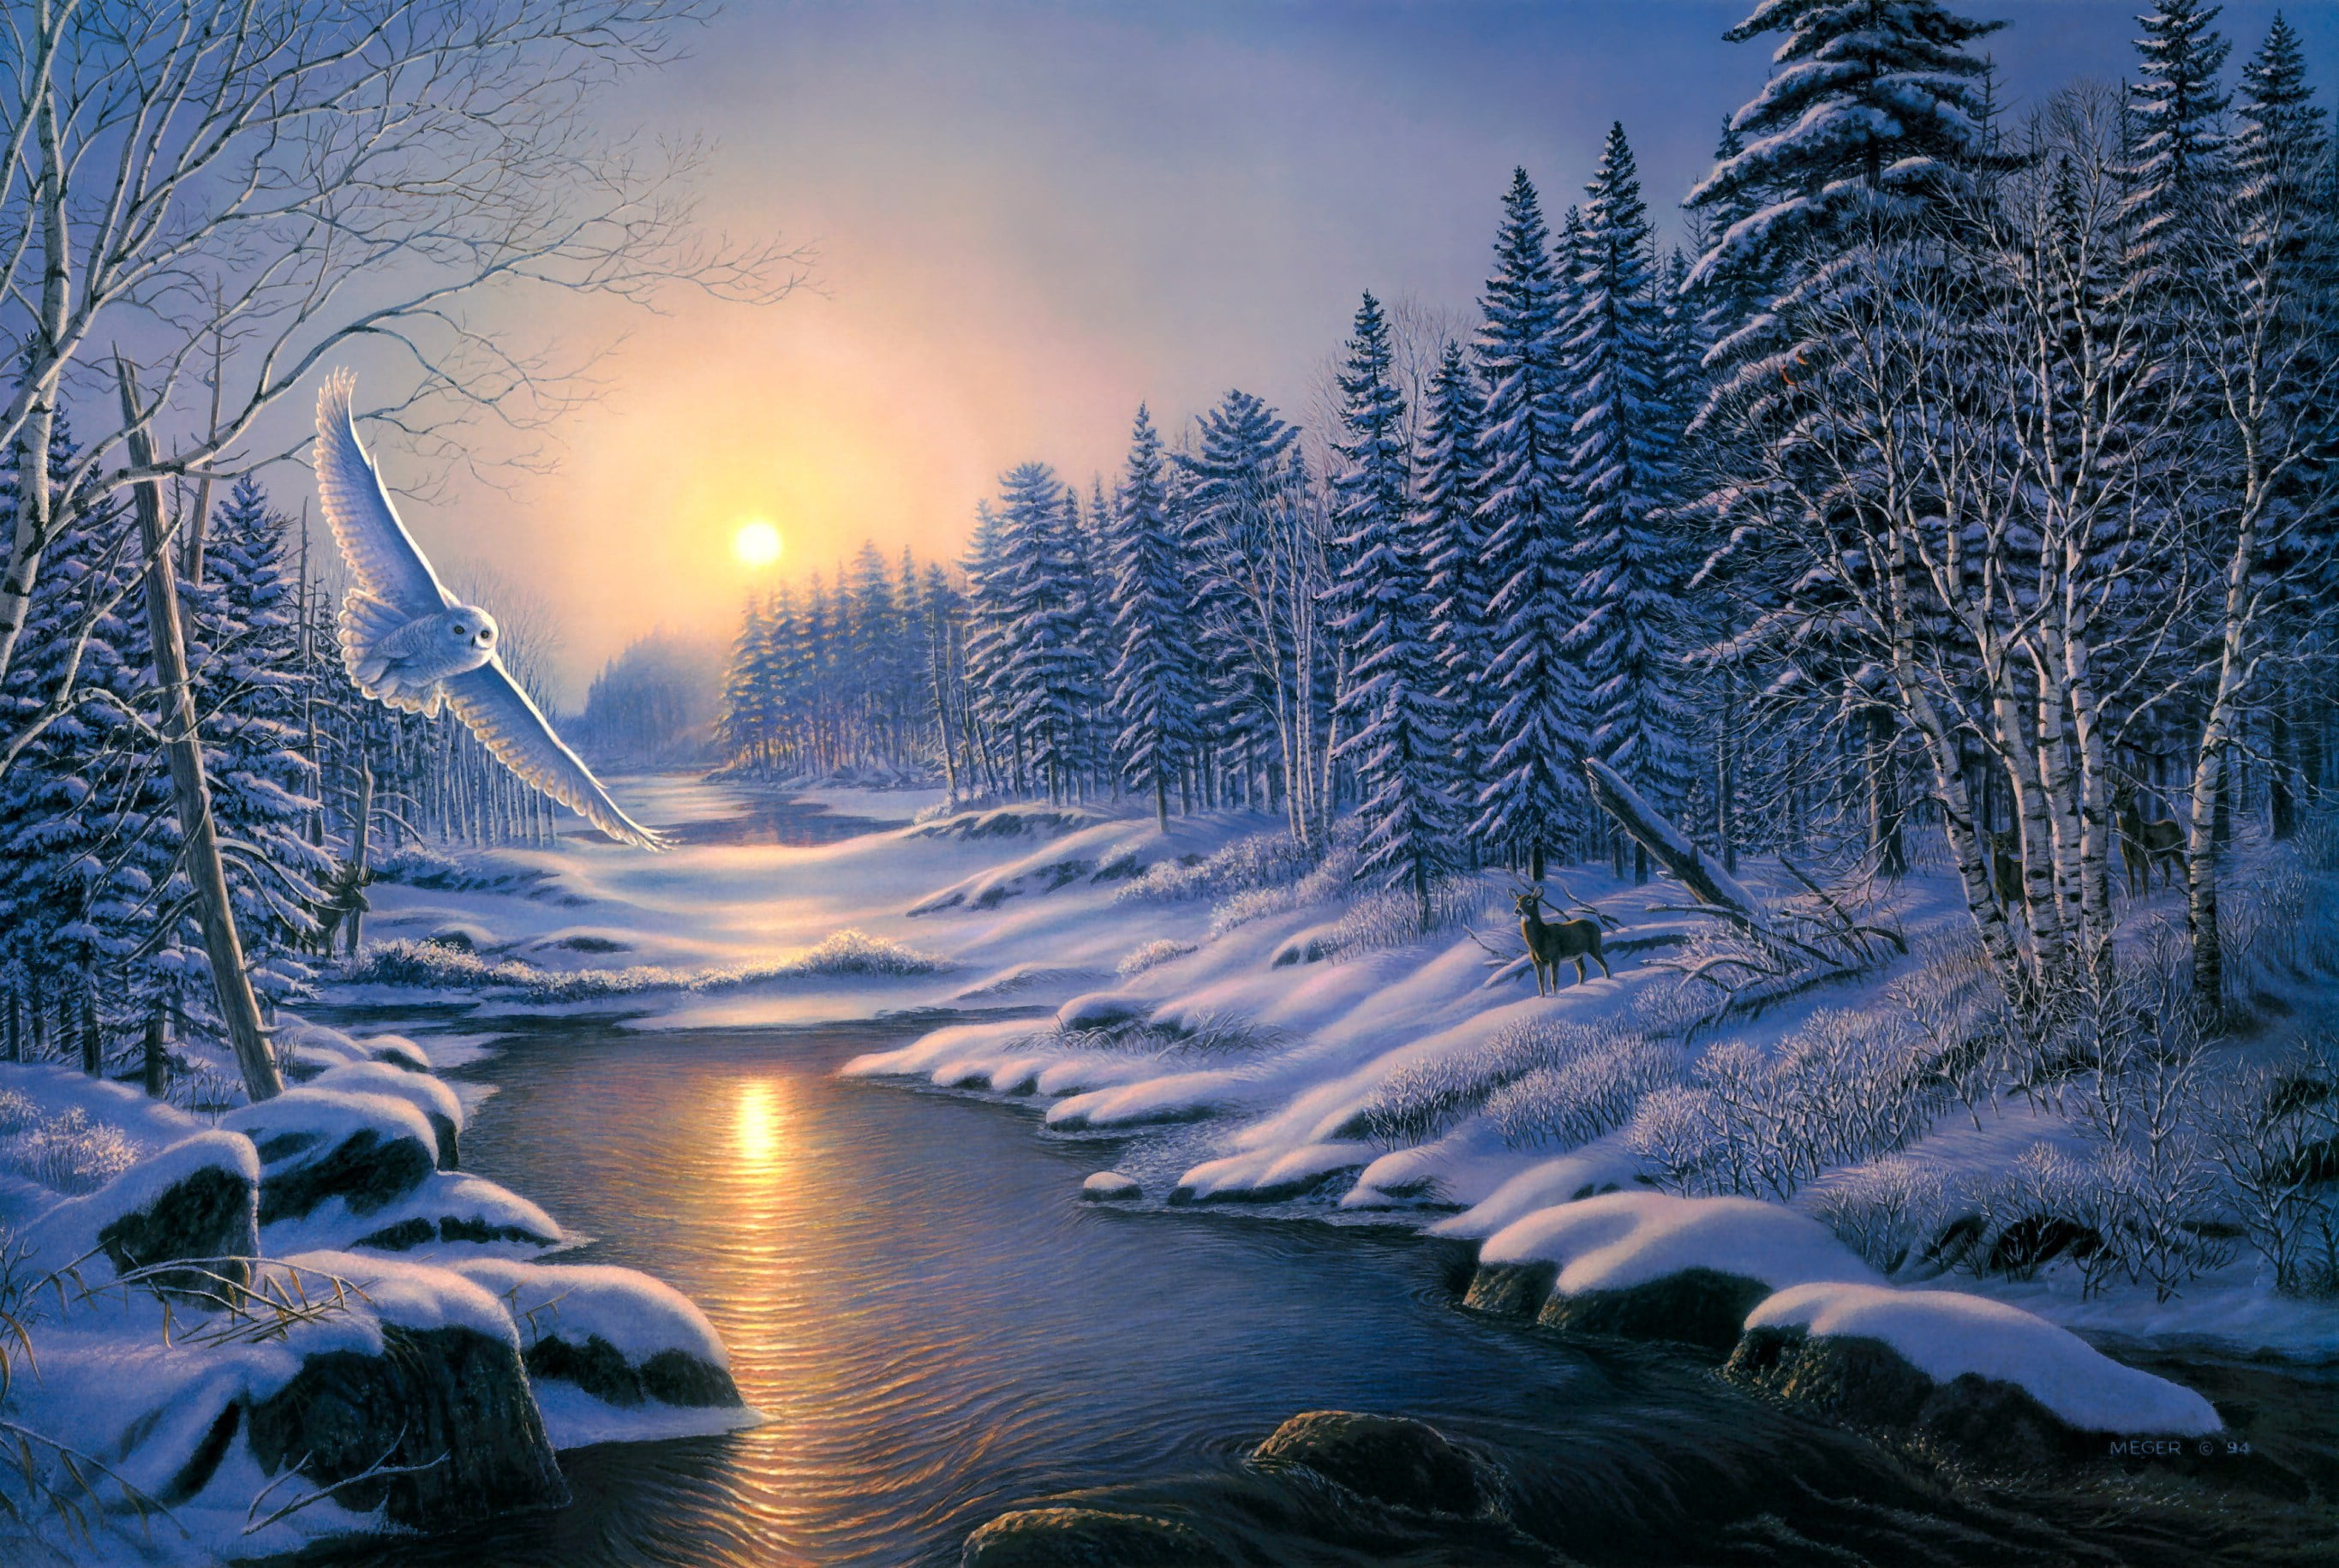 trees and body of water, winter, forest, animals, snow, sunset